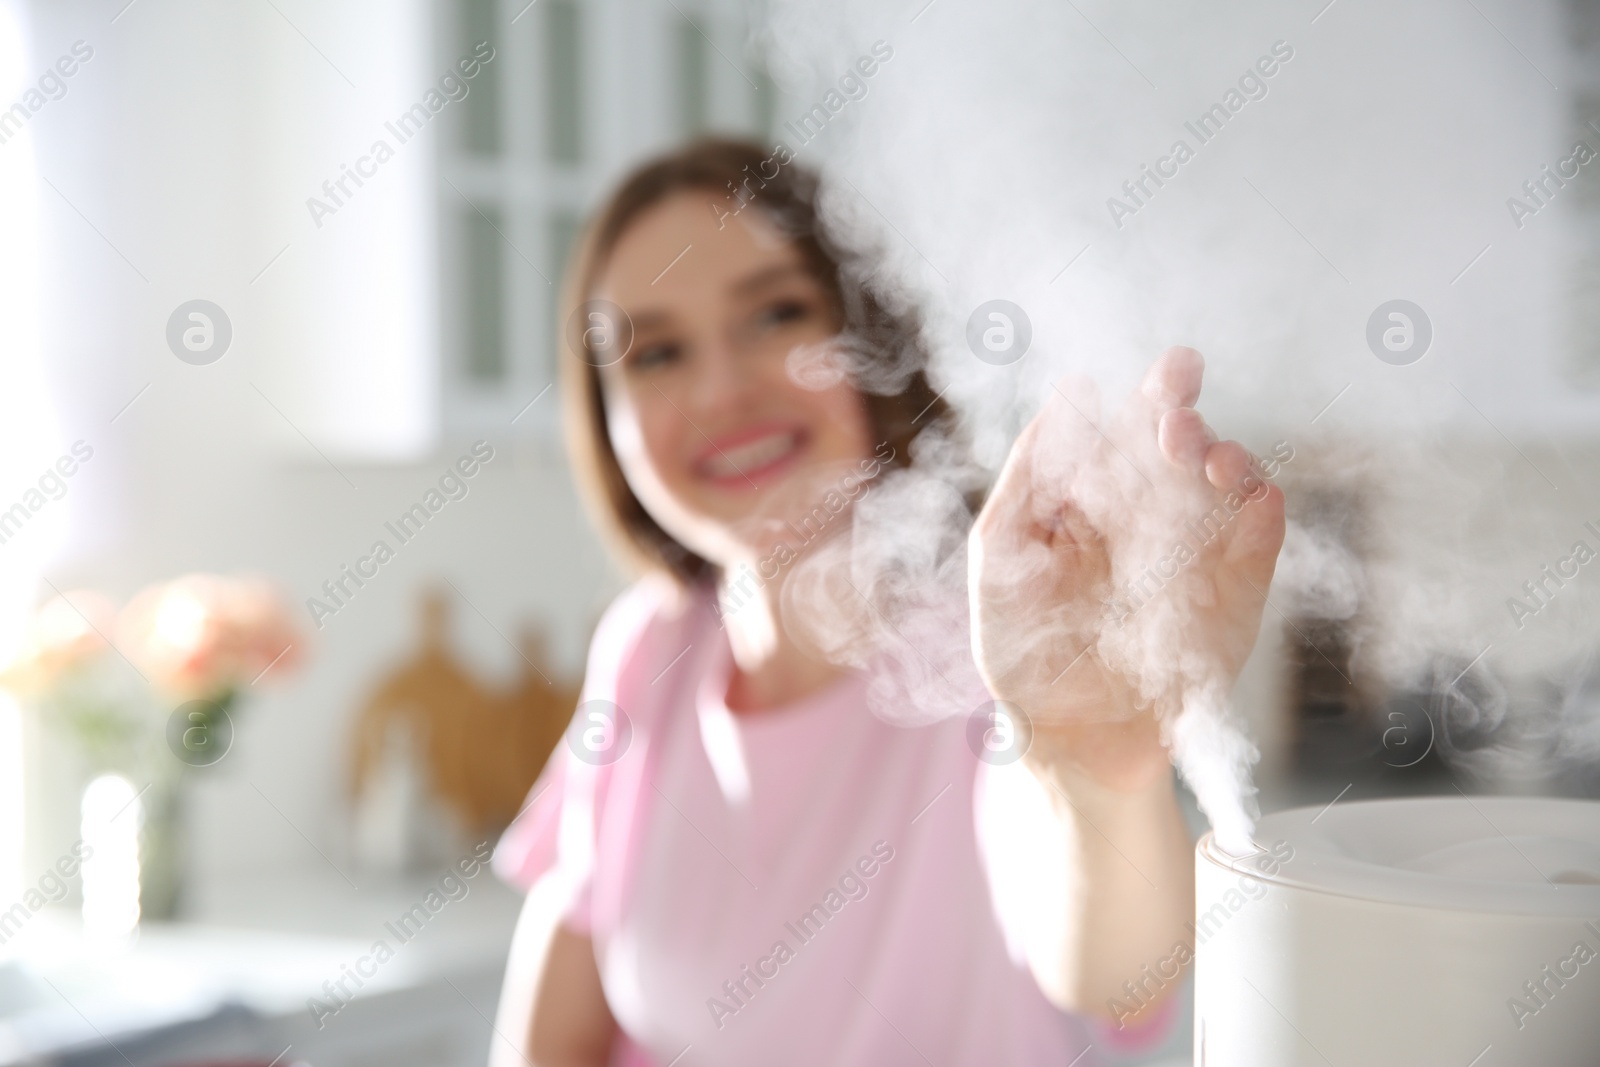 Photo of Woman near modern air humidifier in kitchen, focus on hand